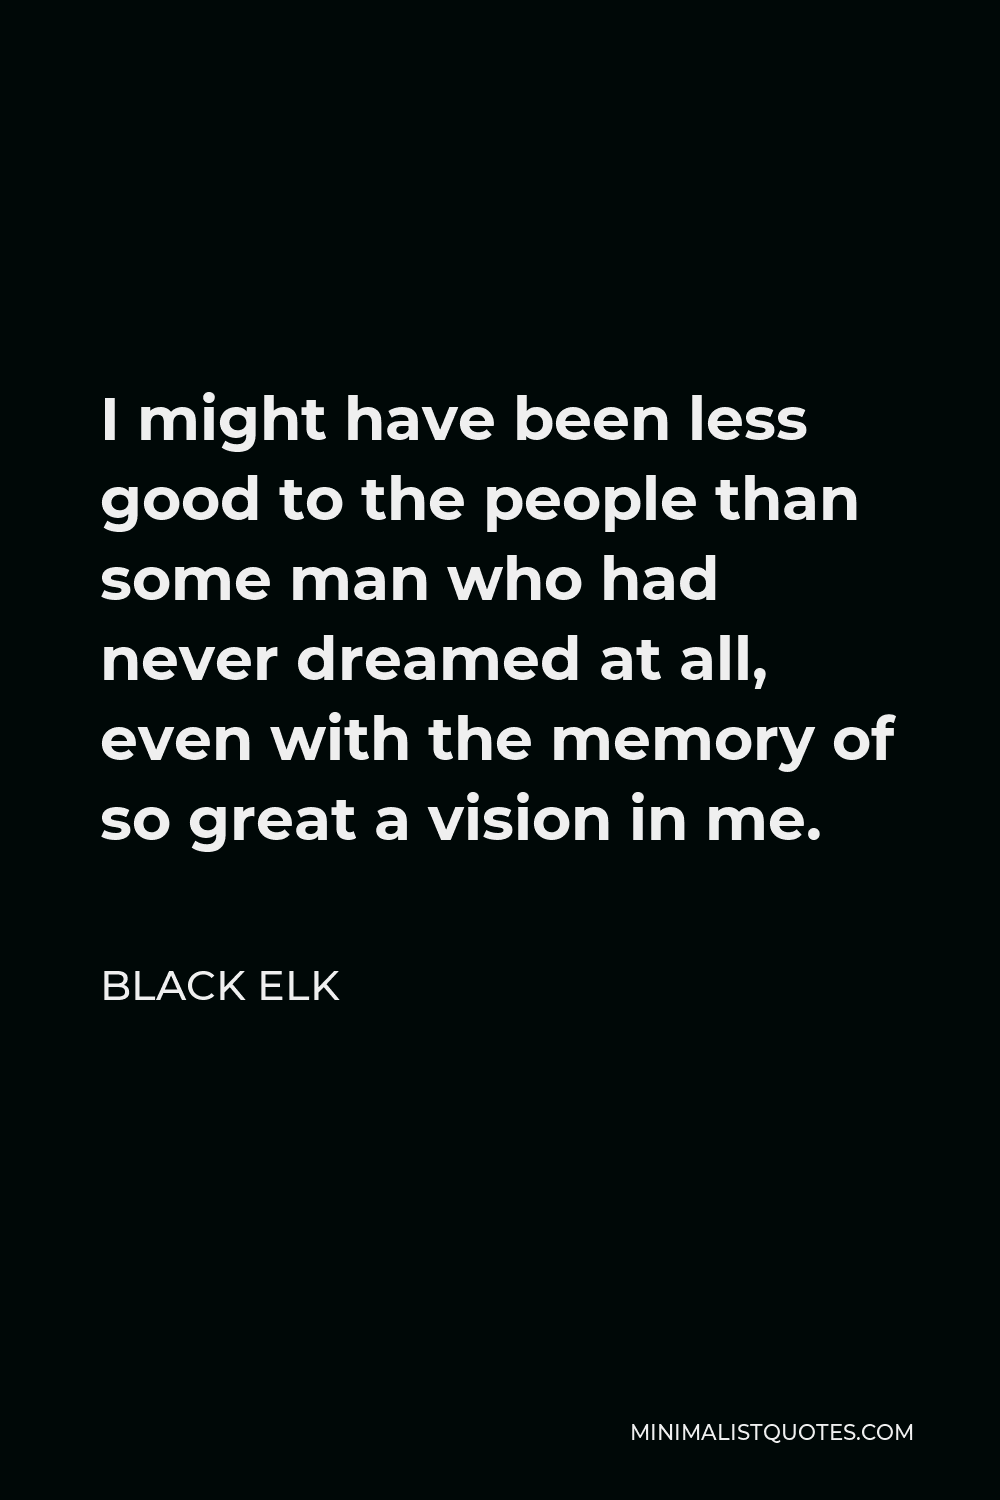 Black Elk Quote - I might have been less good to the people than some man who had never dreamed at all, even with the memory of so great a vision in me.